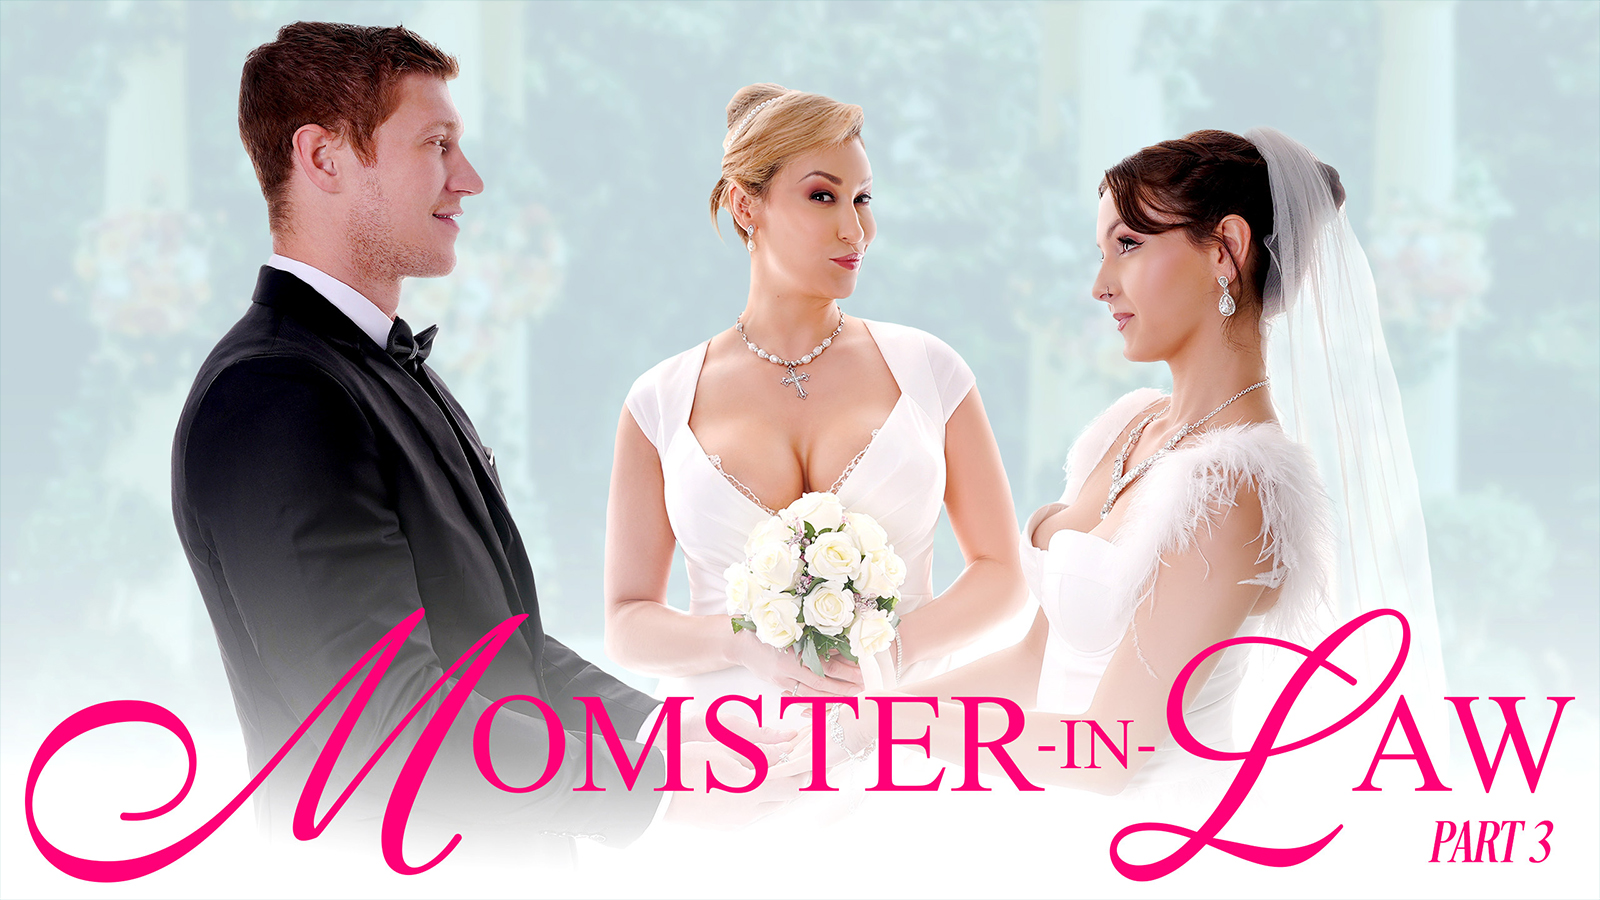 [BadMilfs] Ryan Keely,Serena Hill (Momster-in-Law Part 3: The Big Day)